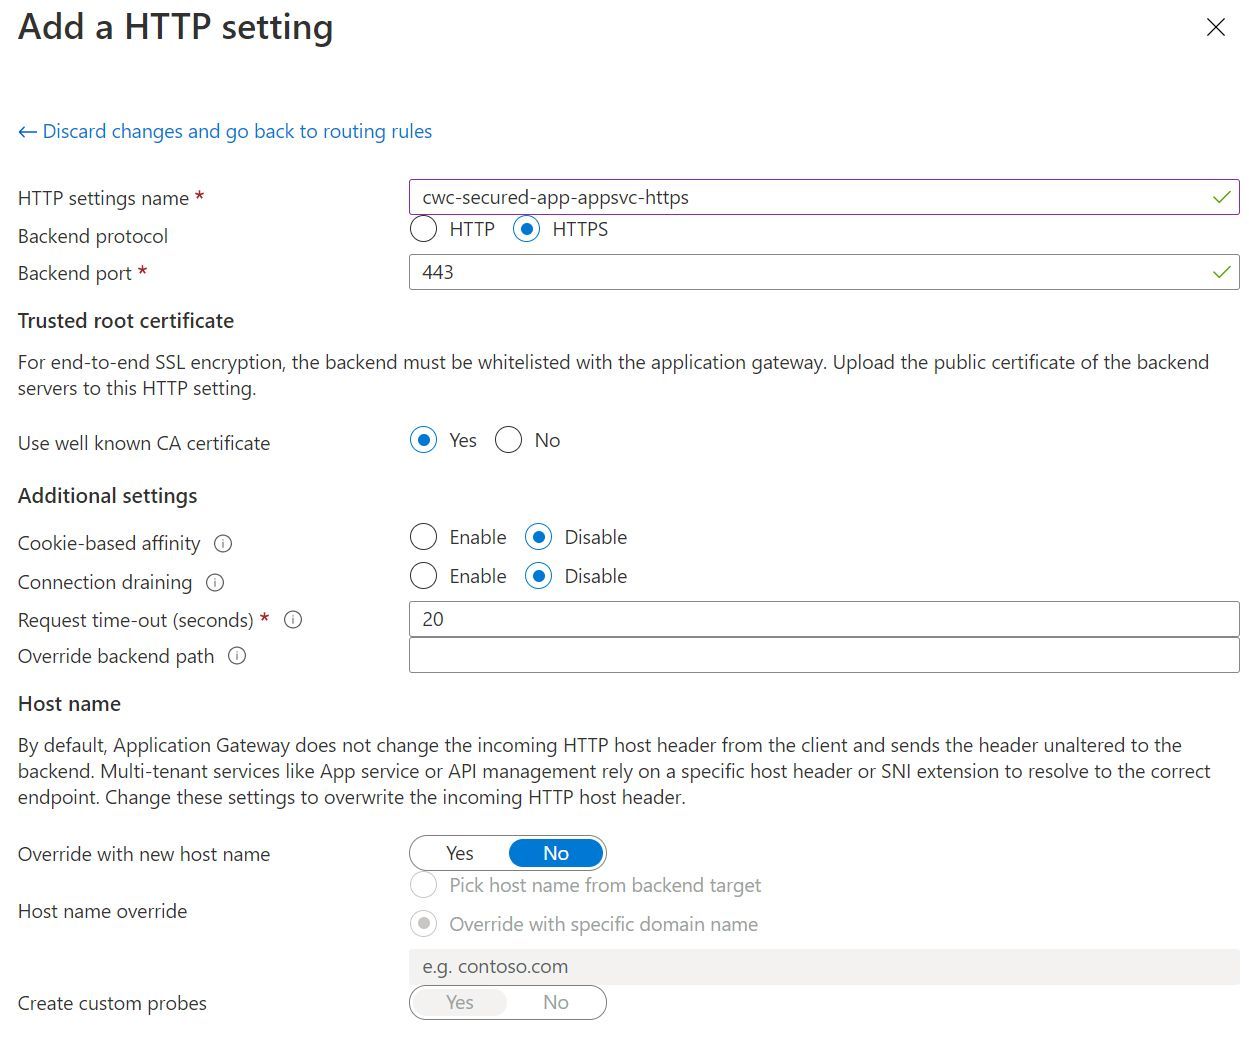 Screenshot showing the the HTTP Settings configuration in the Backend setup experience